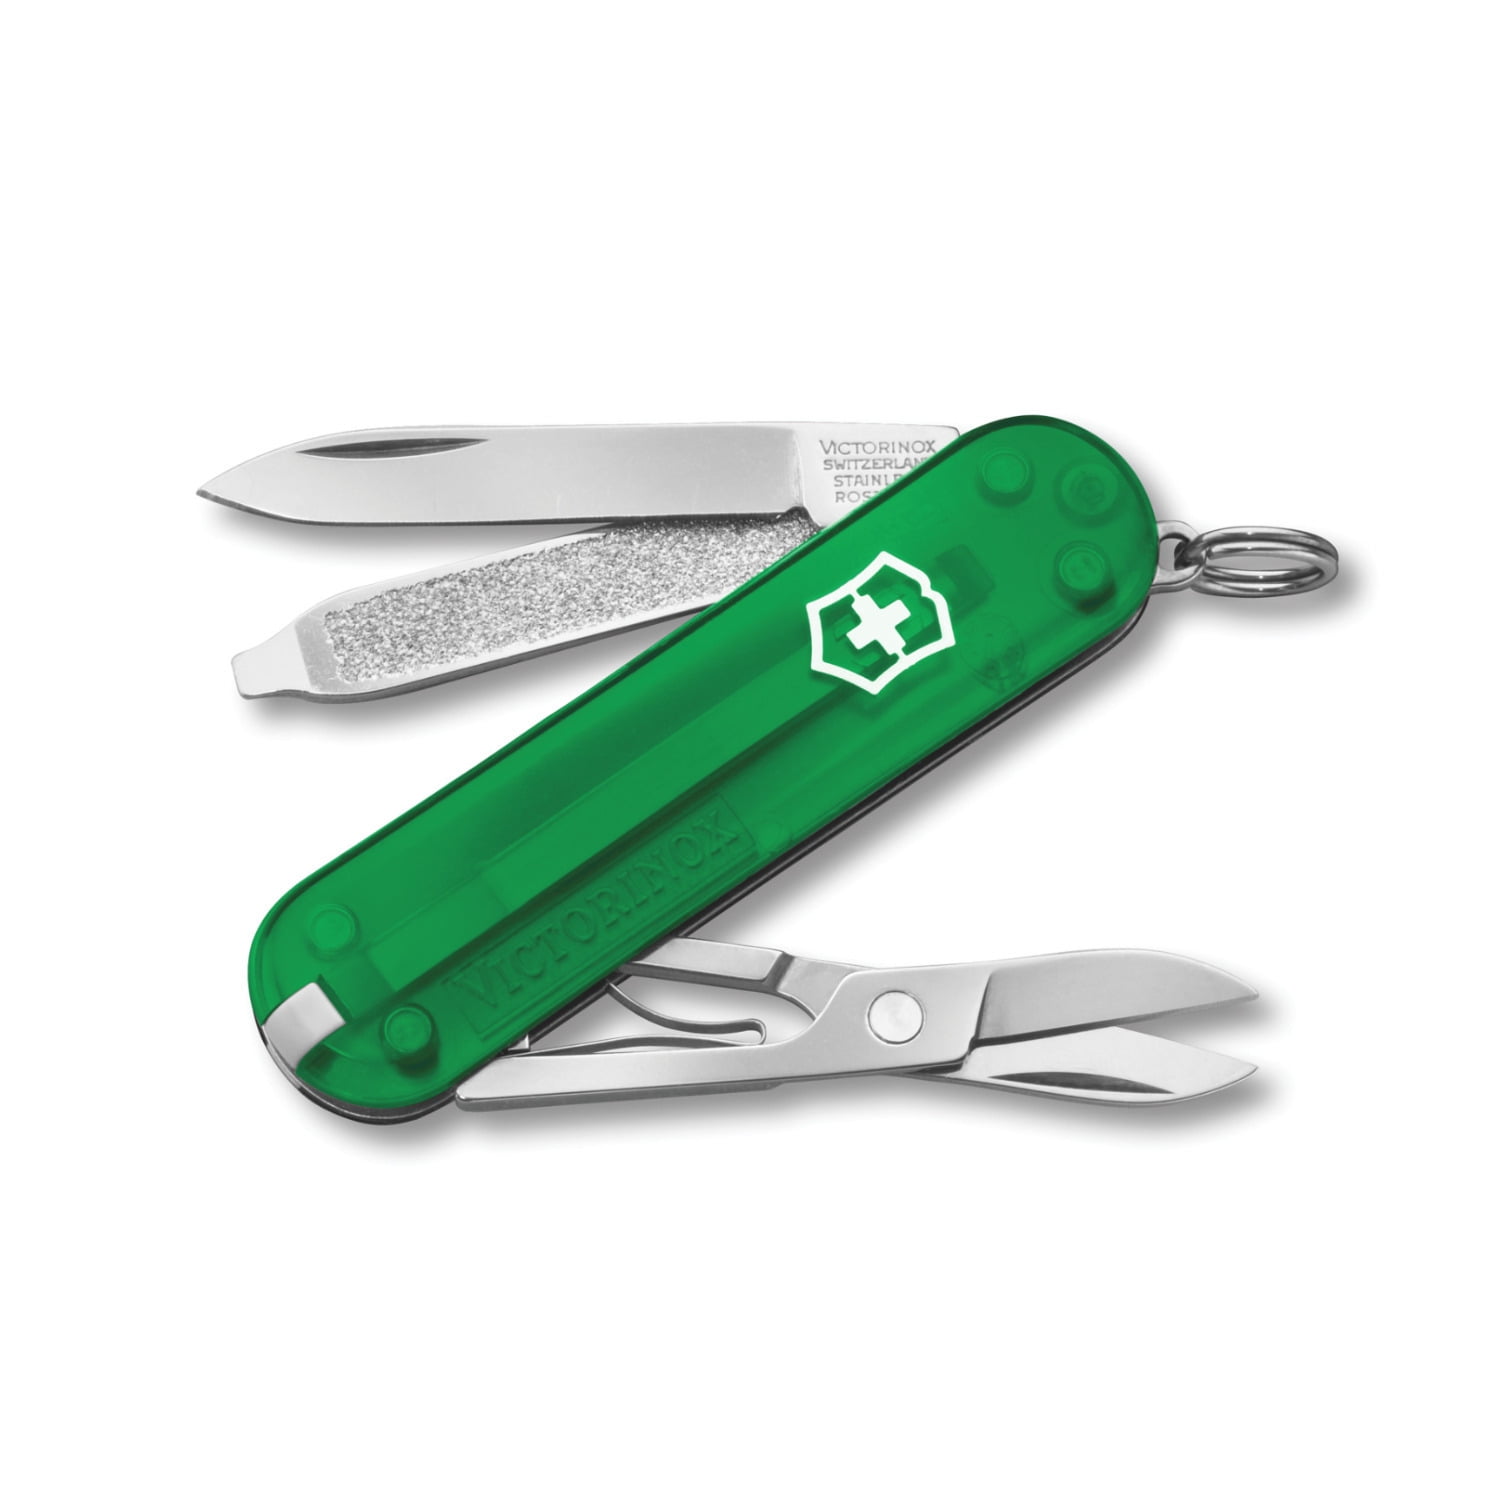 Swiss imported Vickers Swiss Army Knife portable ultra-thin EDC